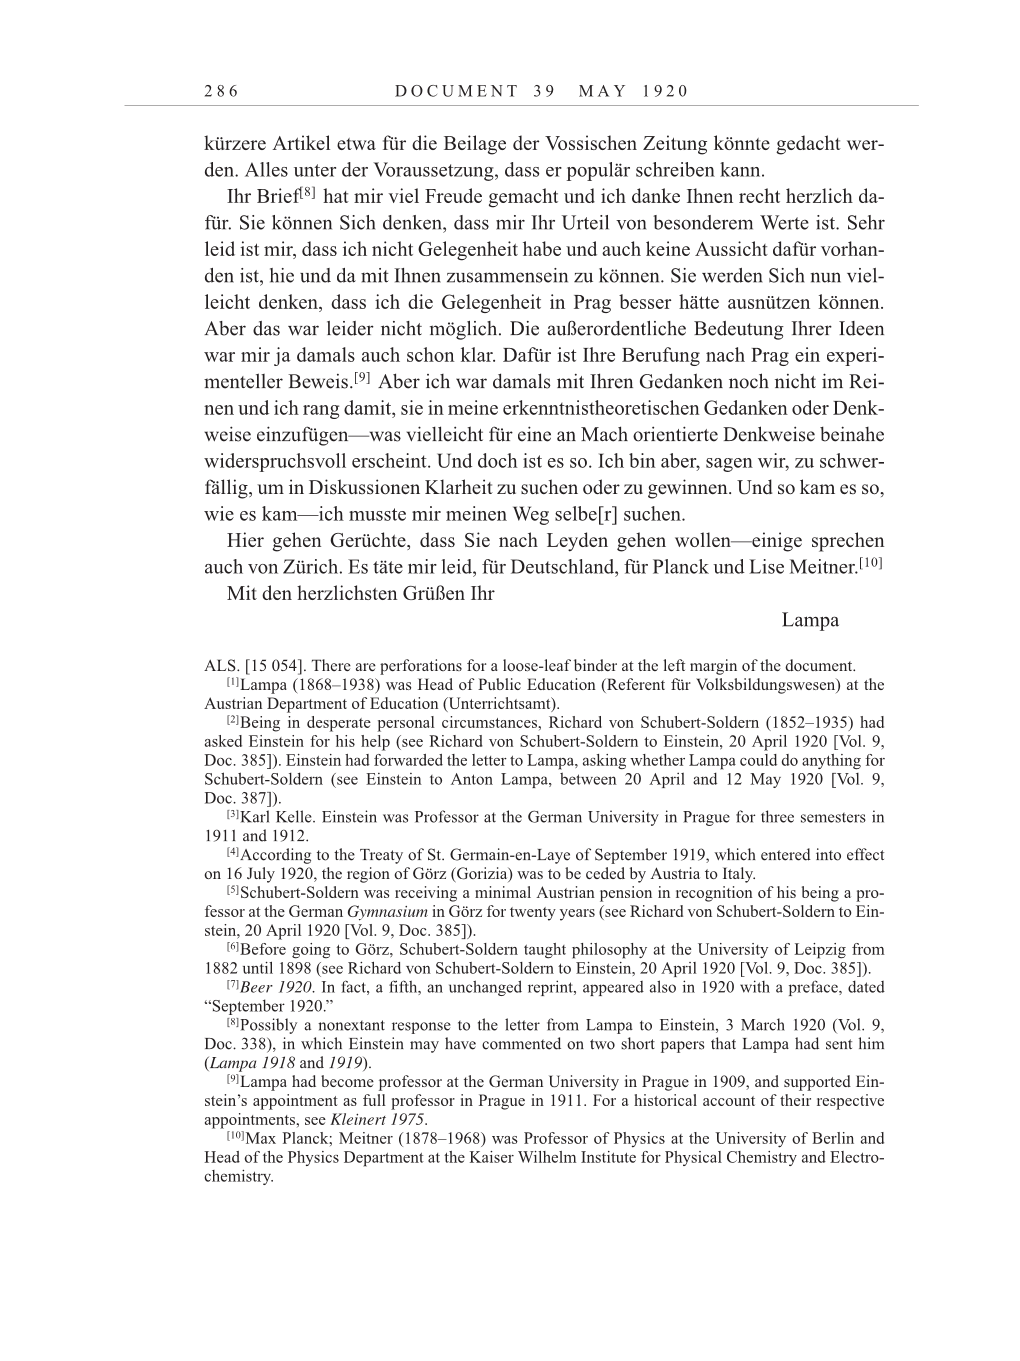 Volume 10: The Berlin Years: Correspondence May-December 1920 / Supplementary Correspondence 1909-1920 page 286